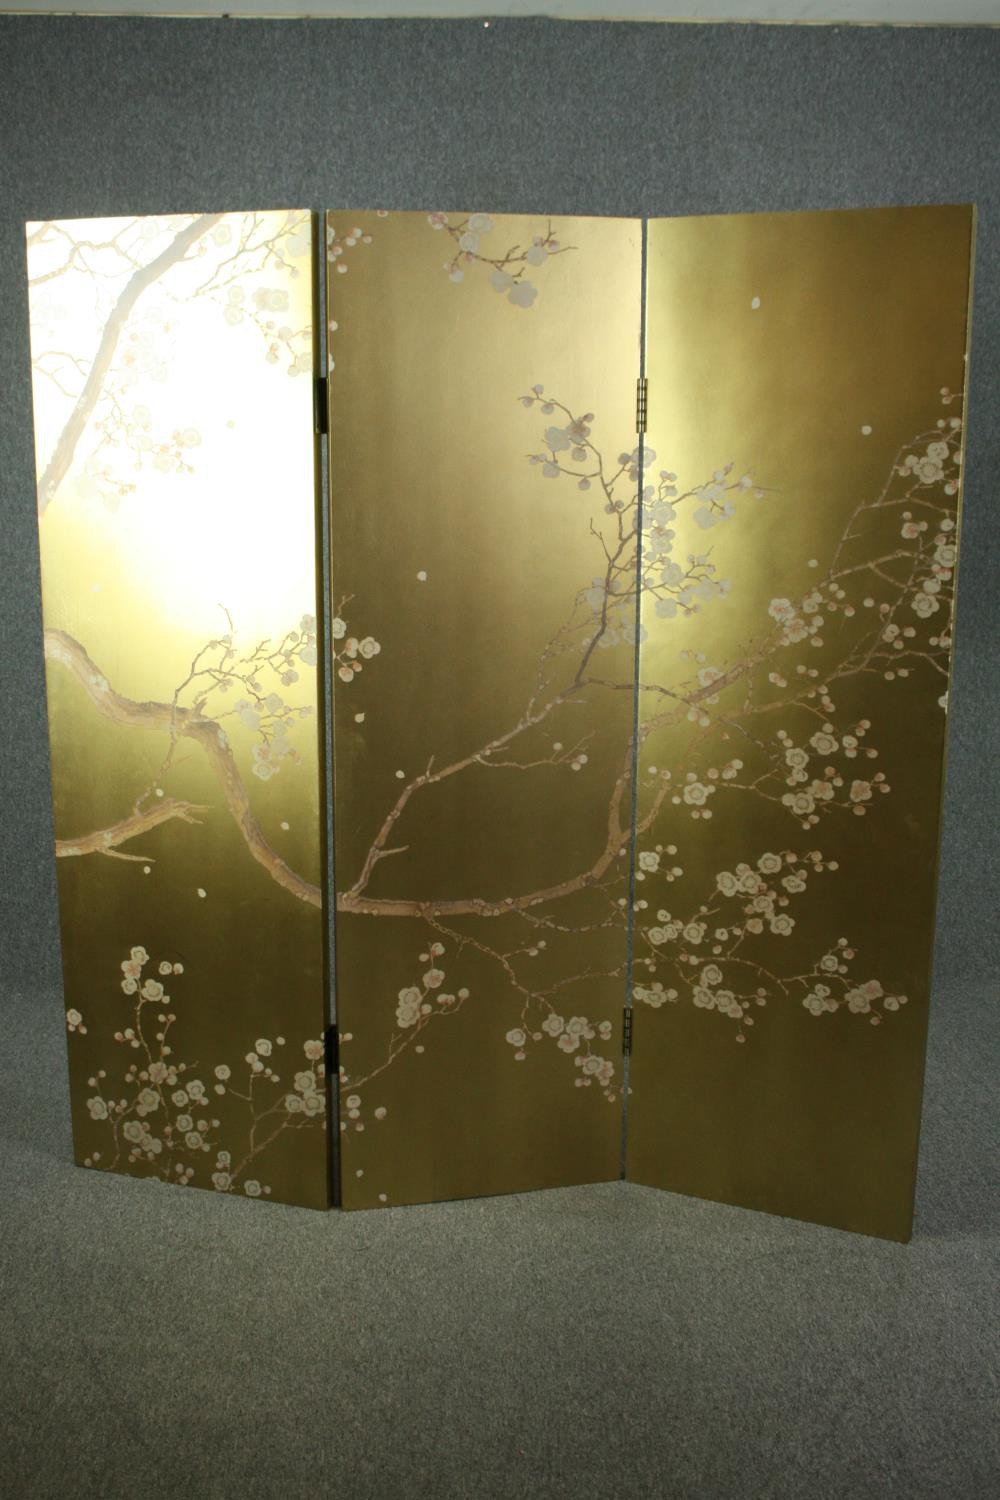 A Japanese three panel screen or room divider with lacquered hand decorated cherry blossom patterns. - Image 2 of 8